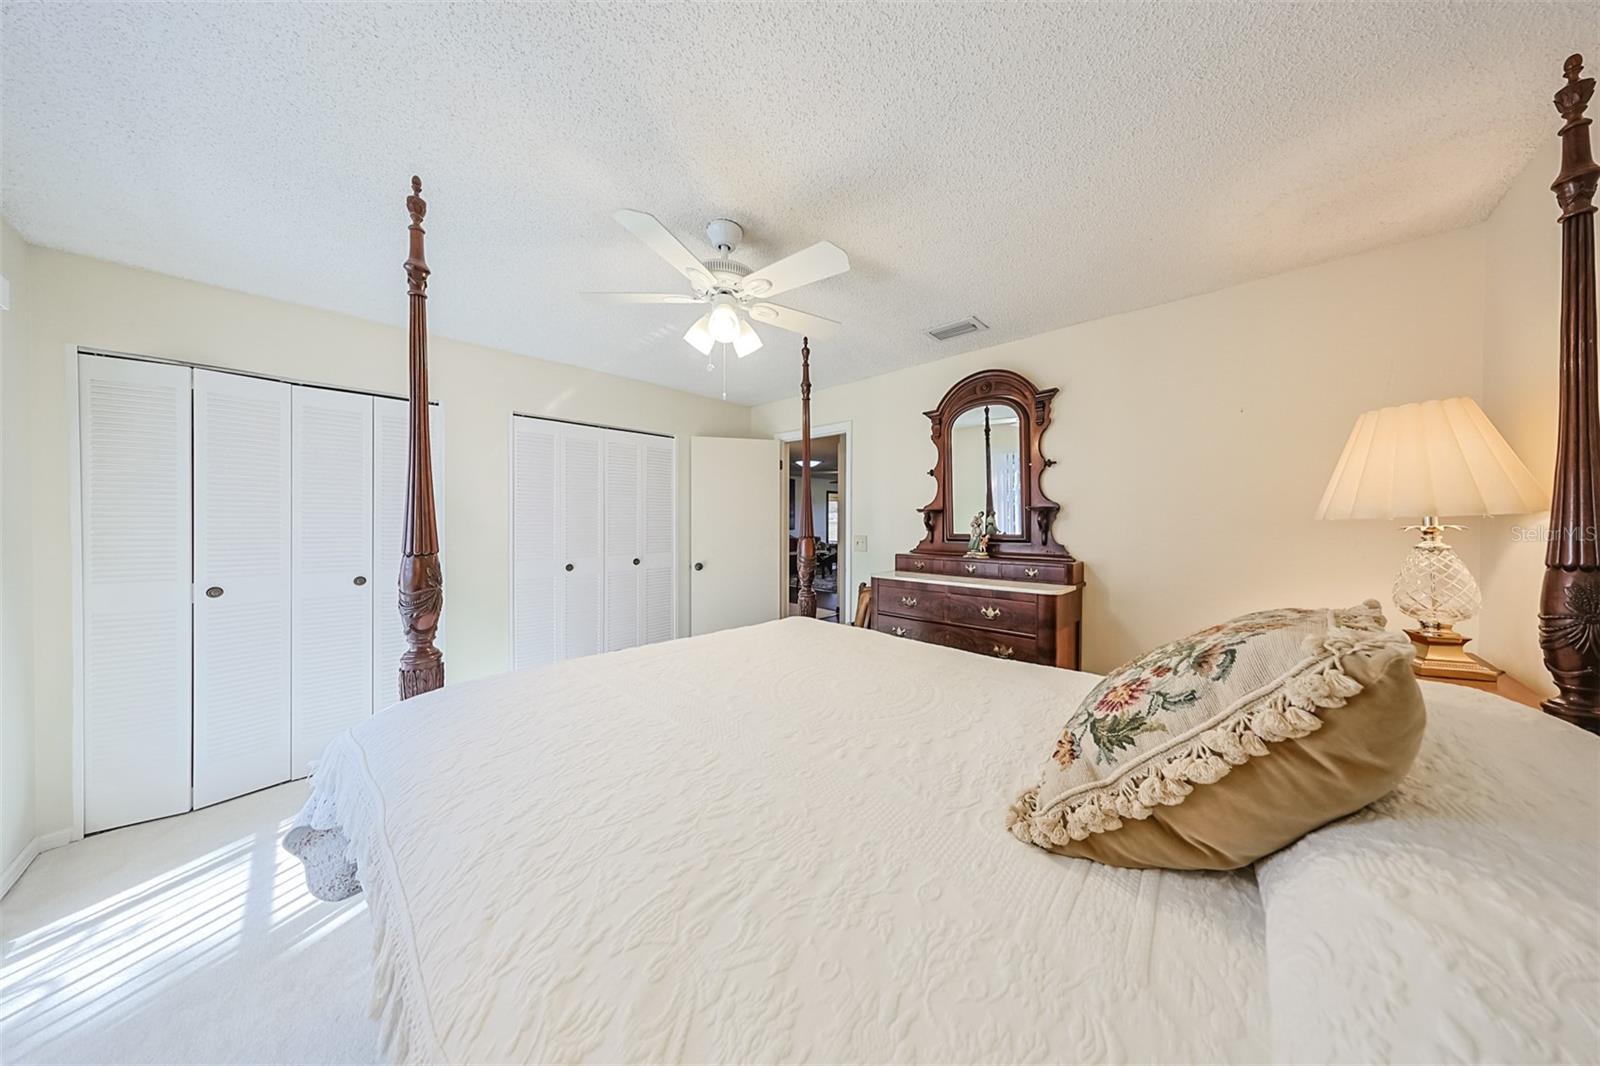 Guest Bathroom has been updated with large walk-in shower (notice the grab bar handle for safety and low entry to walk in with ease) granite counters and tons of lighting to primp for a night out on the town.